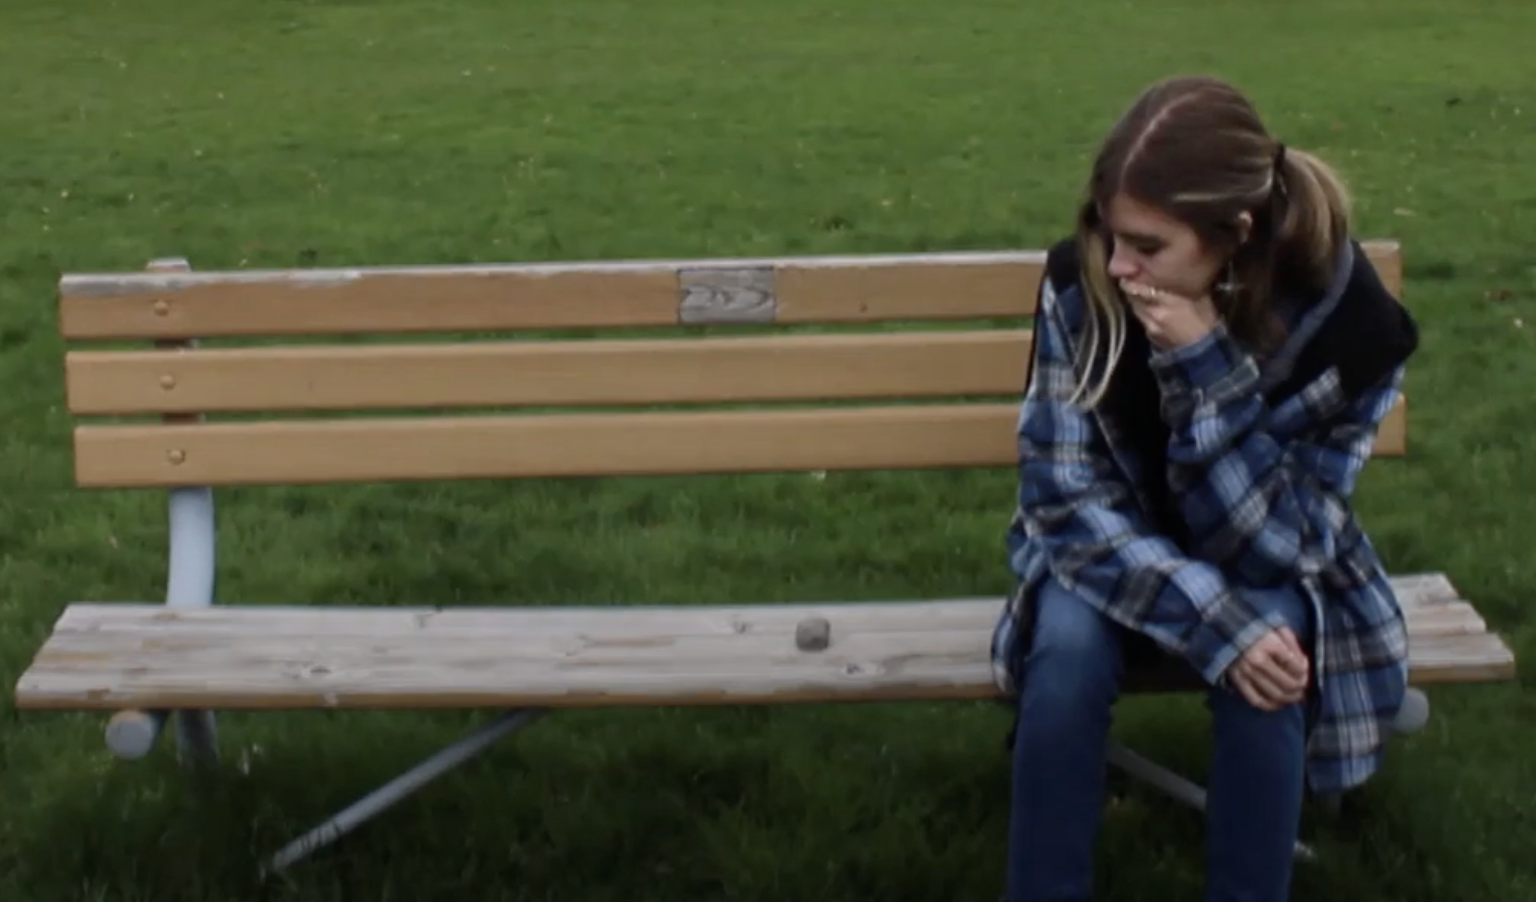 woman contemplating a rock that is "sitting" on a park bench beside her